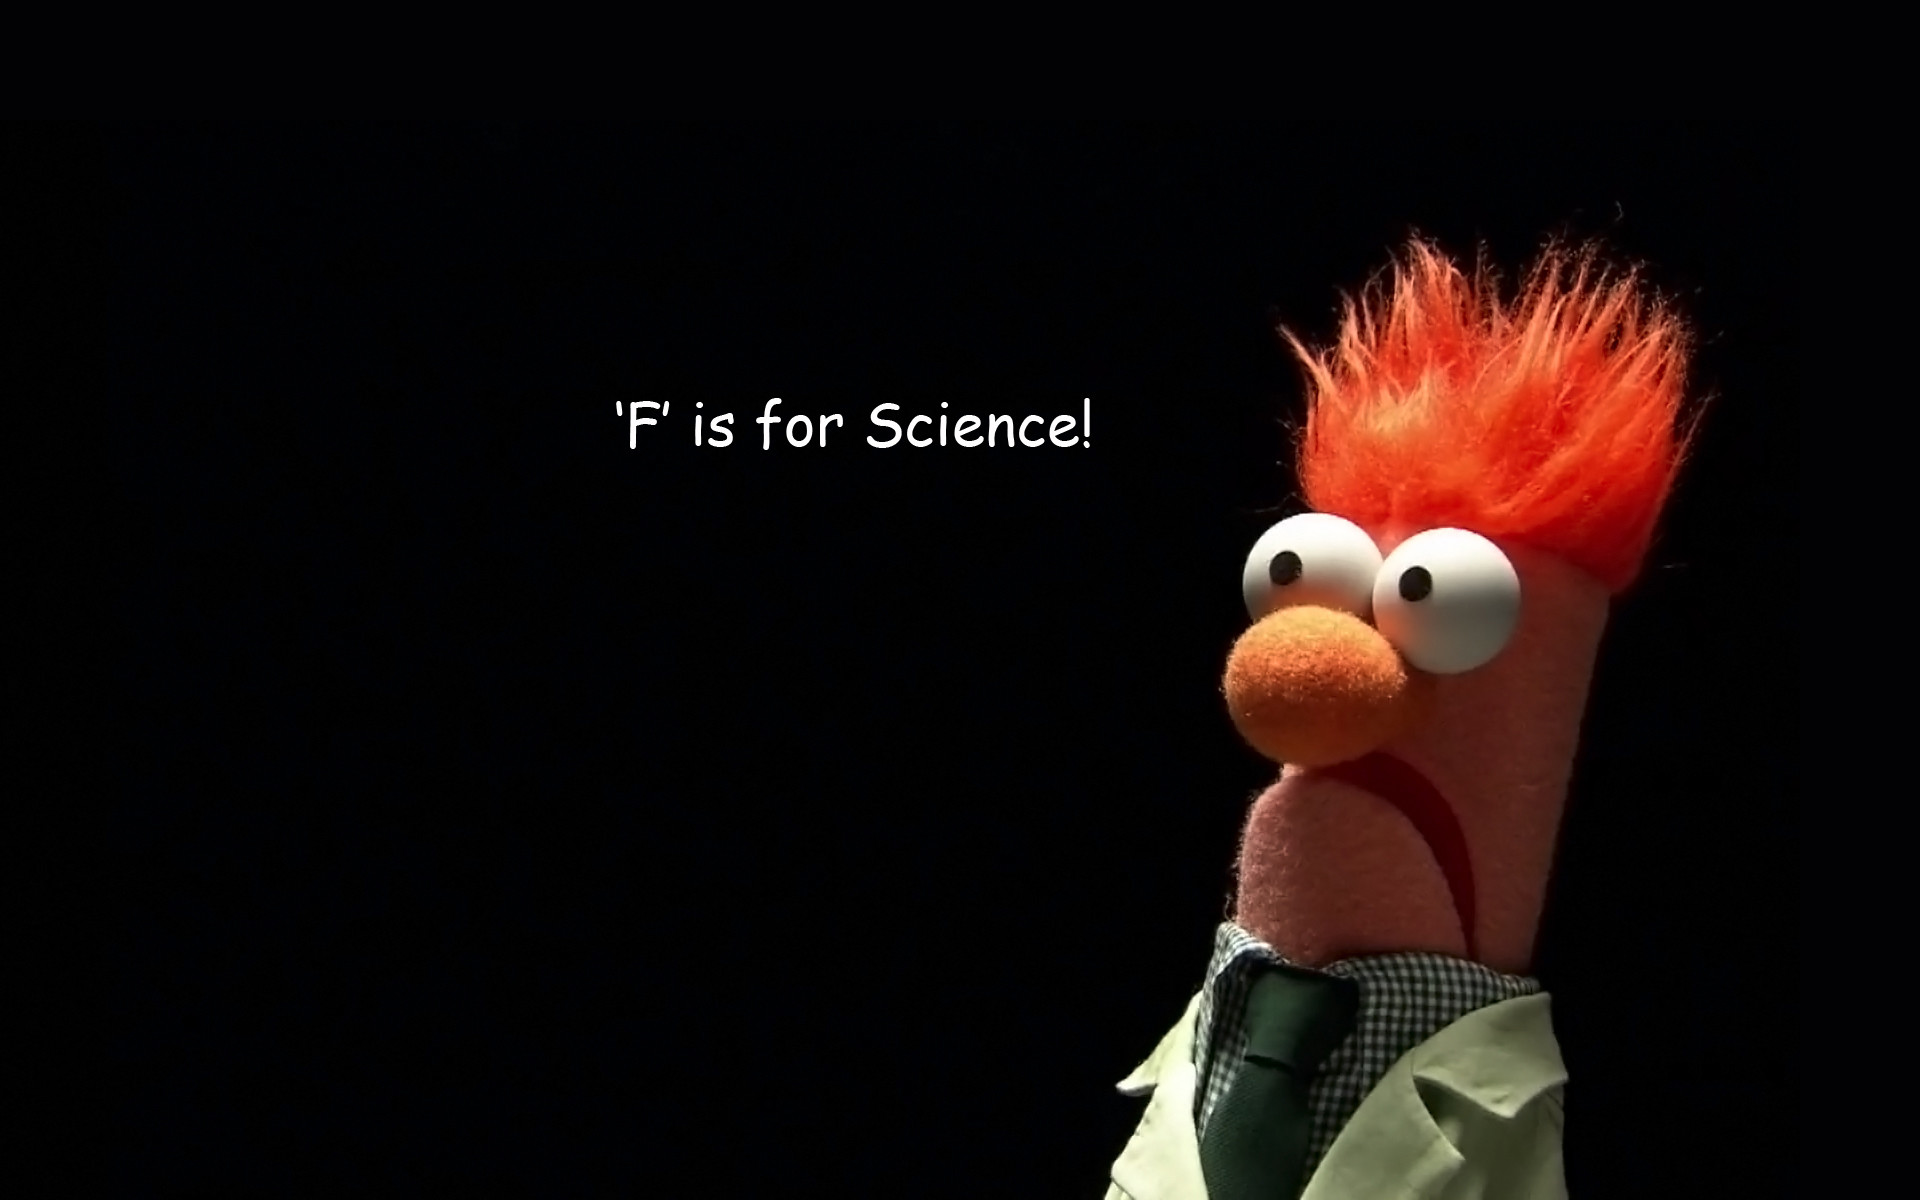 1920x1200 Here's a desktop background to help you through. 'F is for Science!'